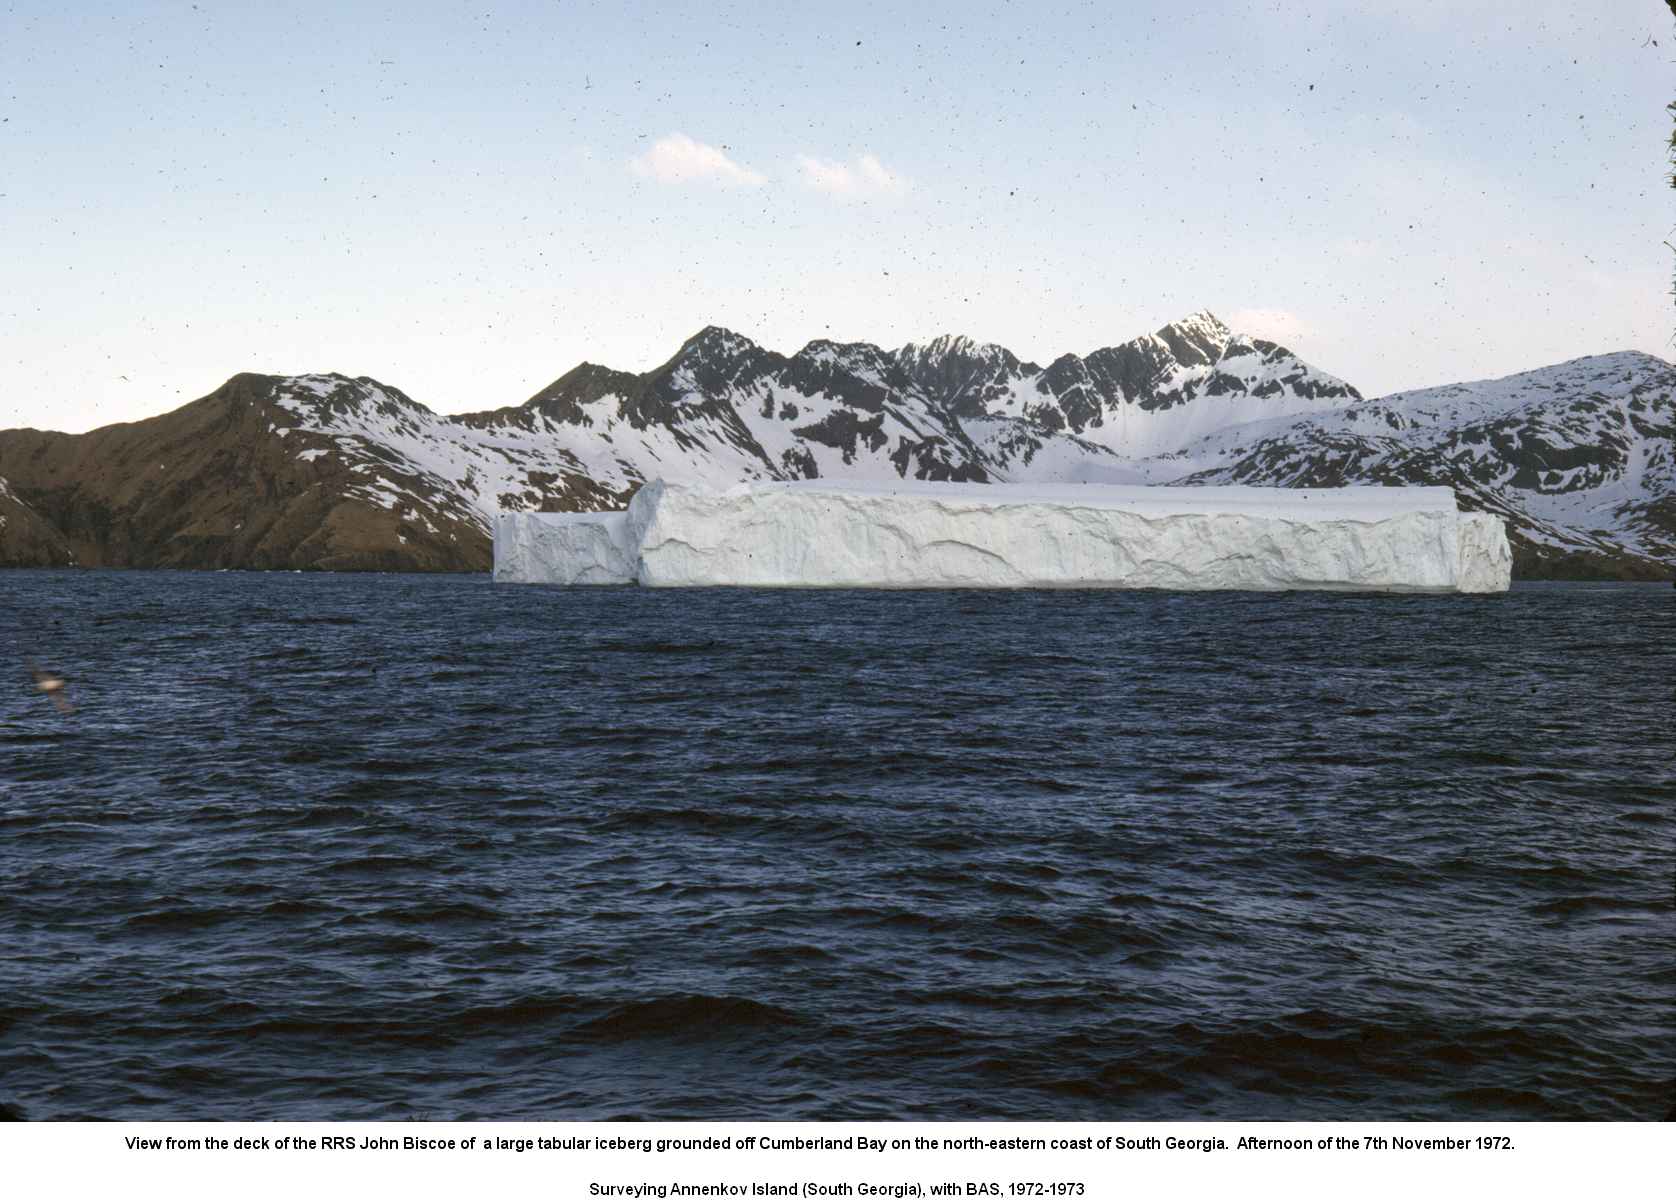 View from the deck of the RRS John Biscoe of a large tabular iceberg grounded off Cumberland Bay on the north-eastern coast of South Georgia.  Afternoon of the 7th November 1972.